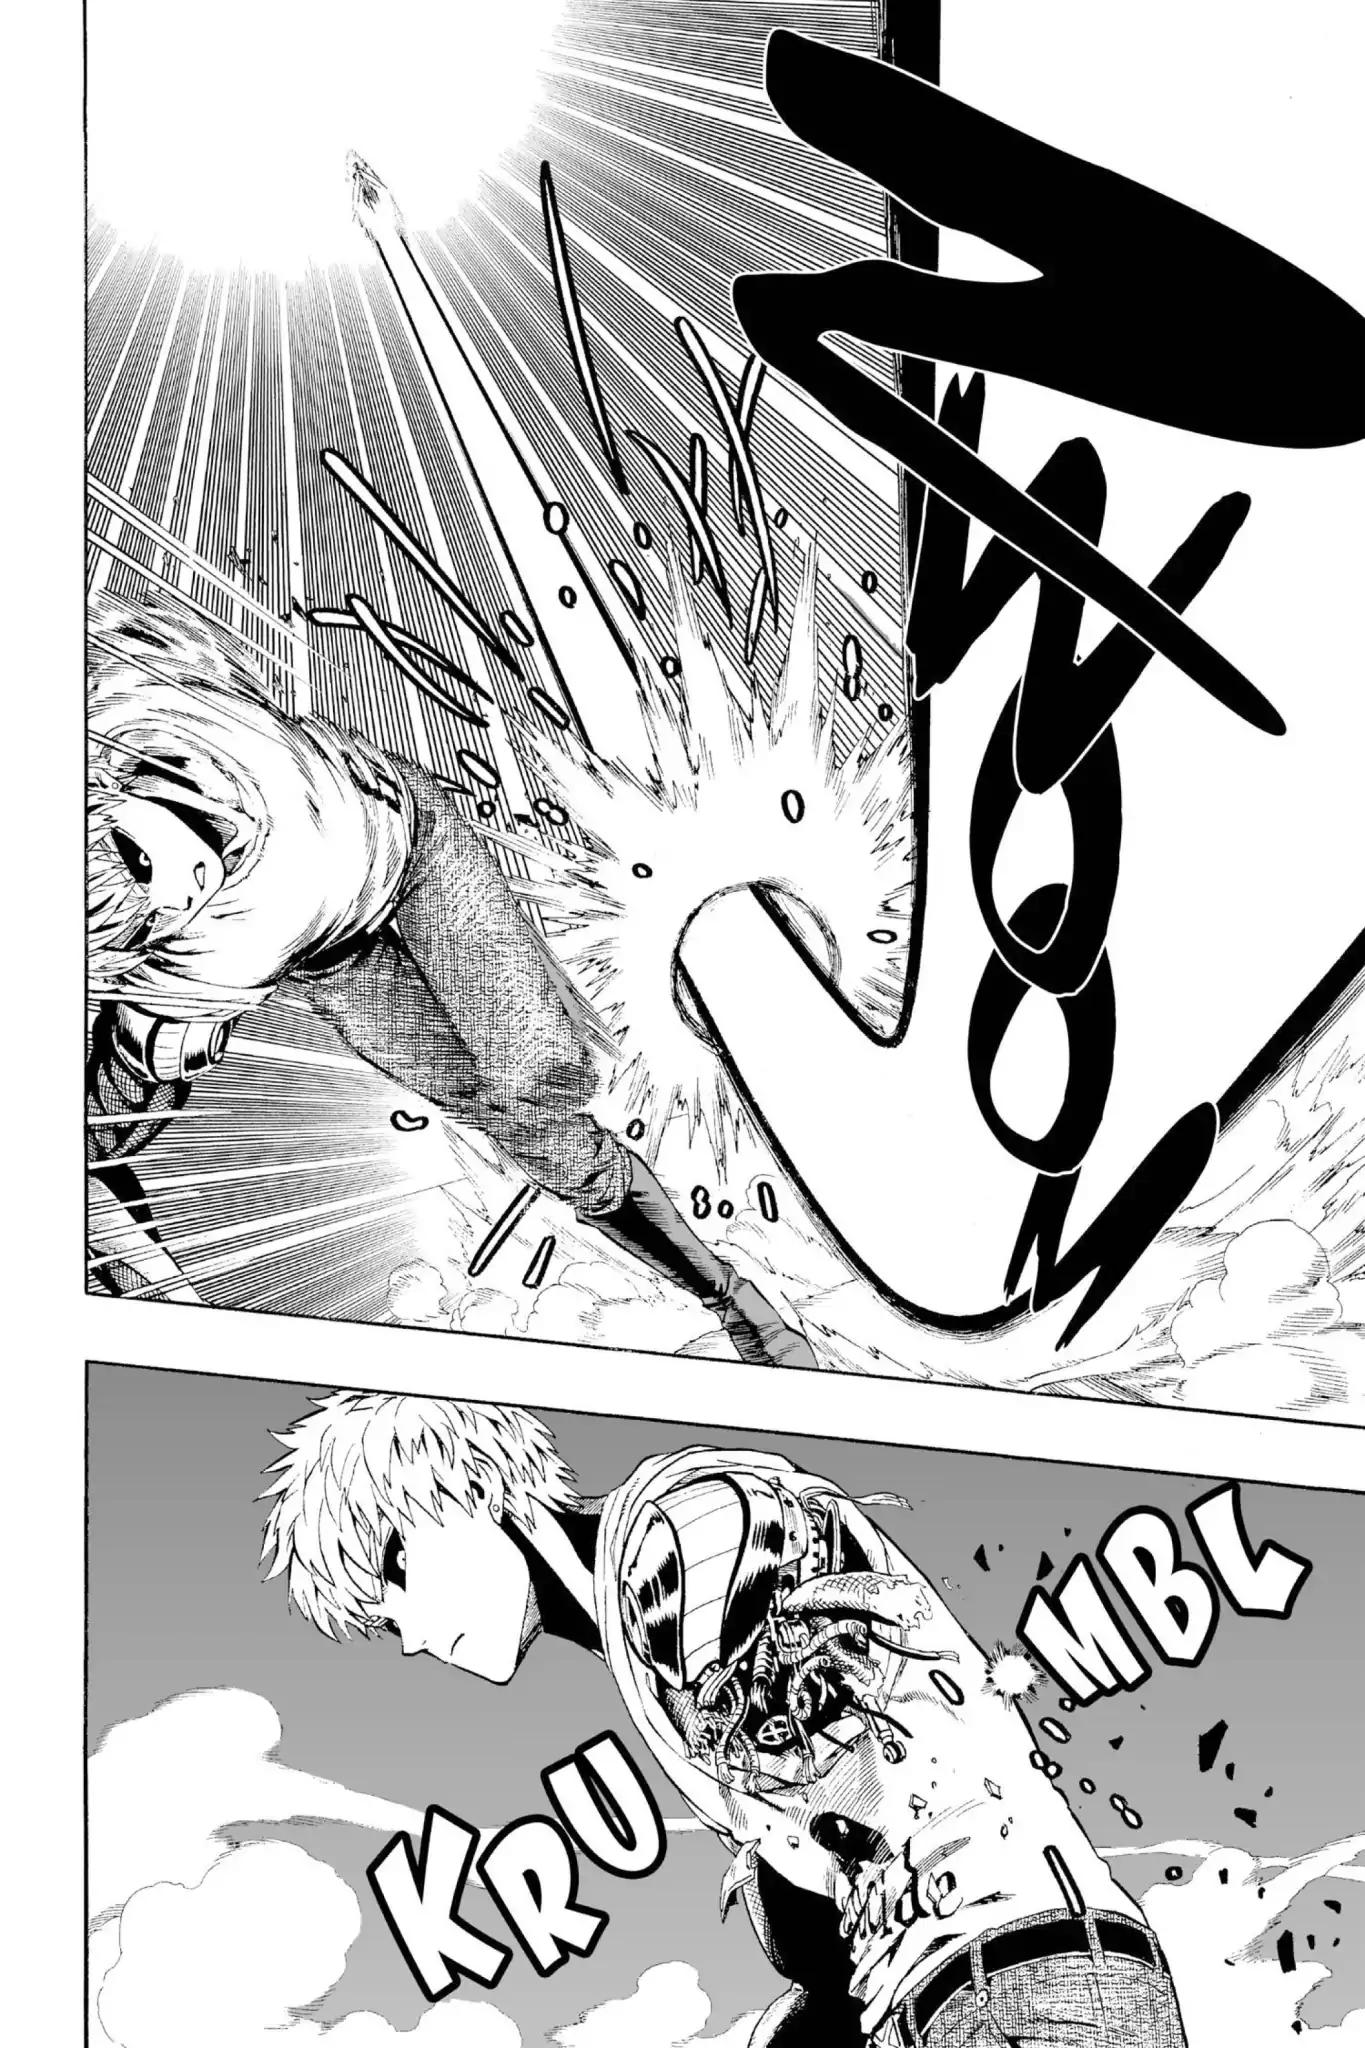 One-Punch Man chapter 6 page 4